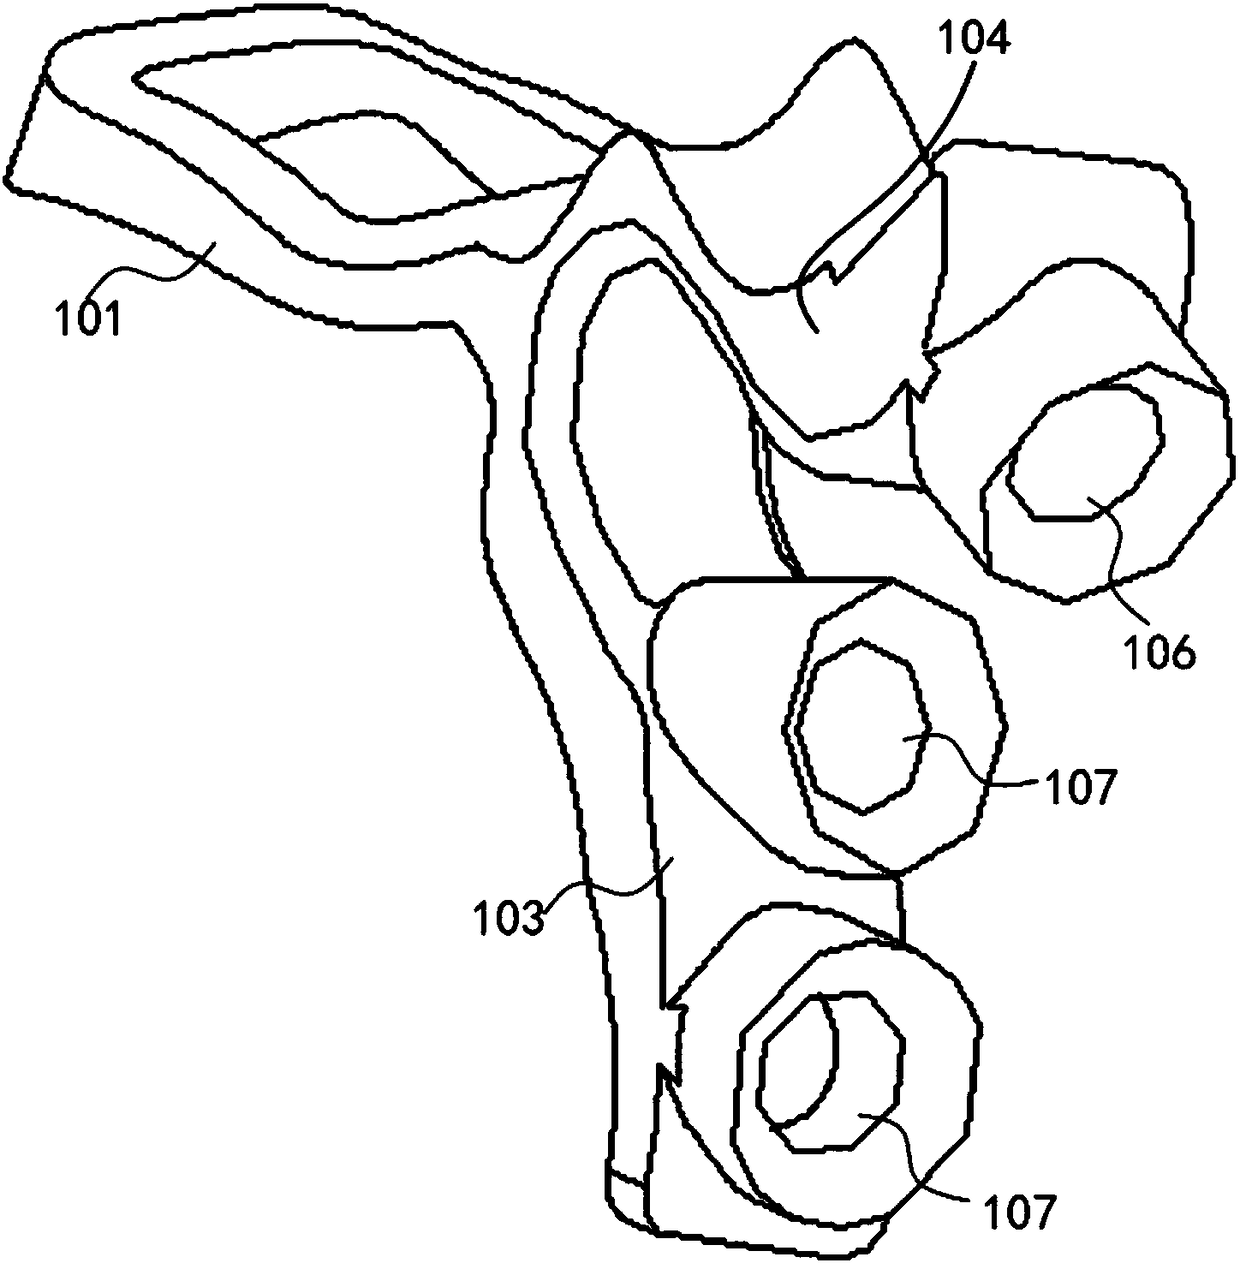 Fixation and fusion device for atlantoaxial lateral mass joint